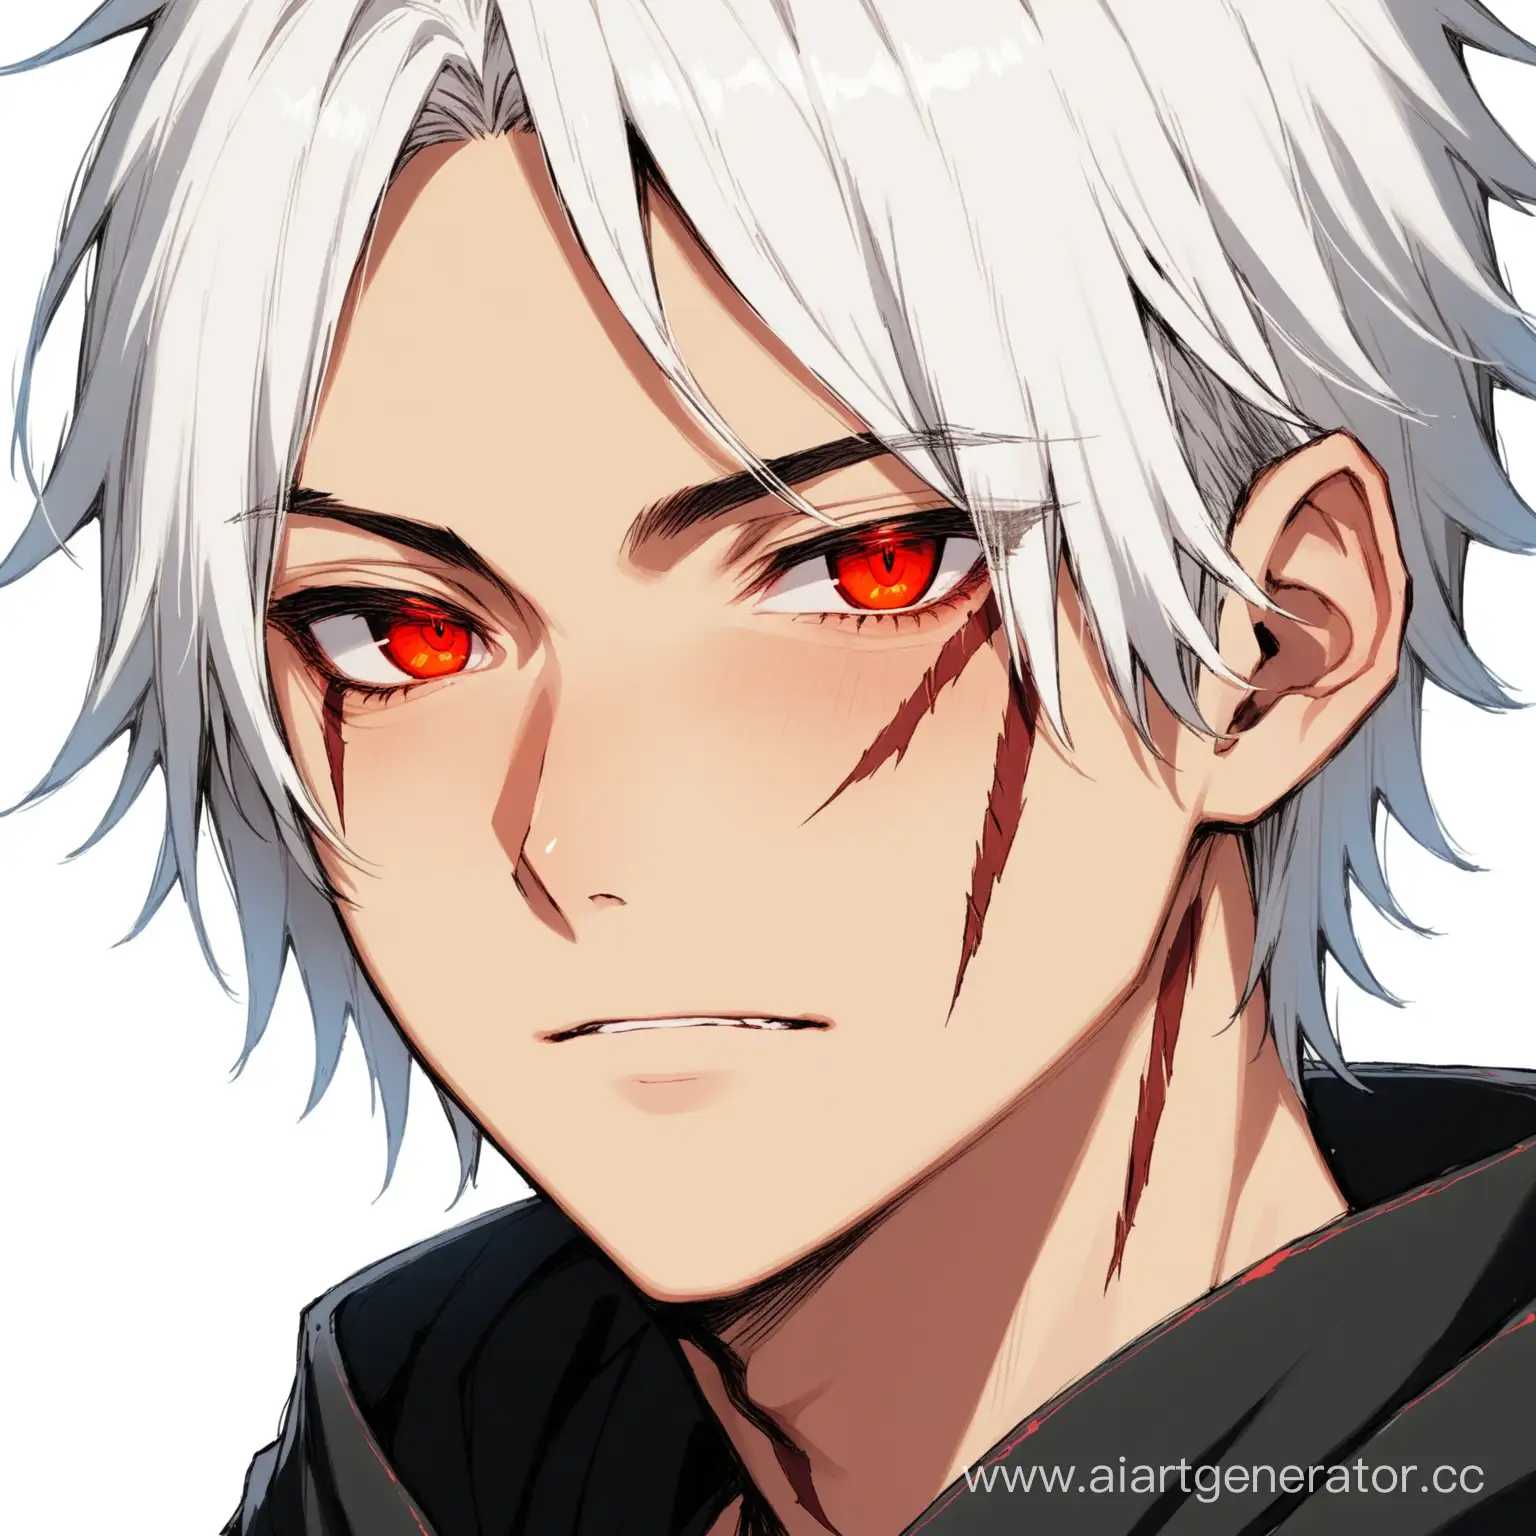 Mysterious-Youth-with-White-Hair-Red-Eyes-and-a-Scar